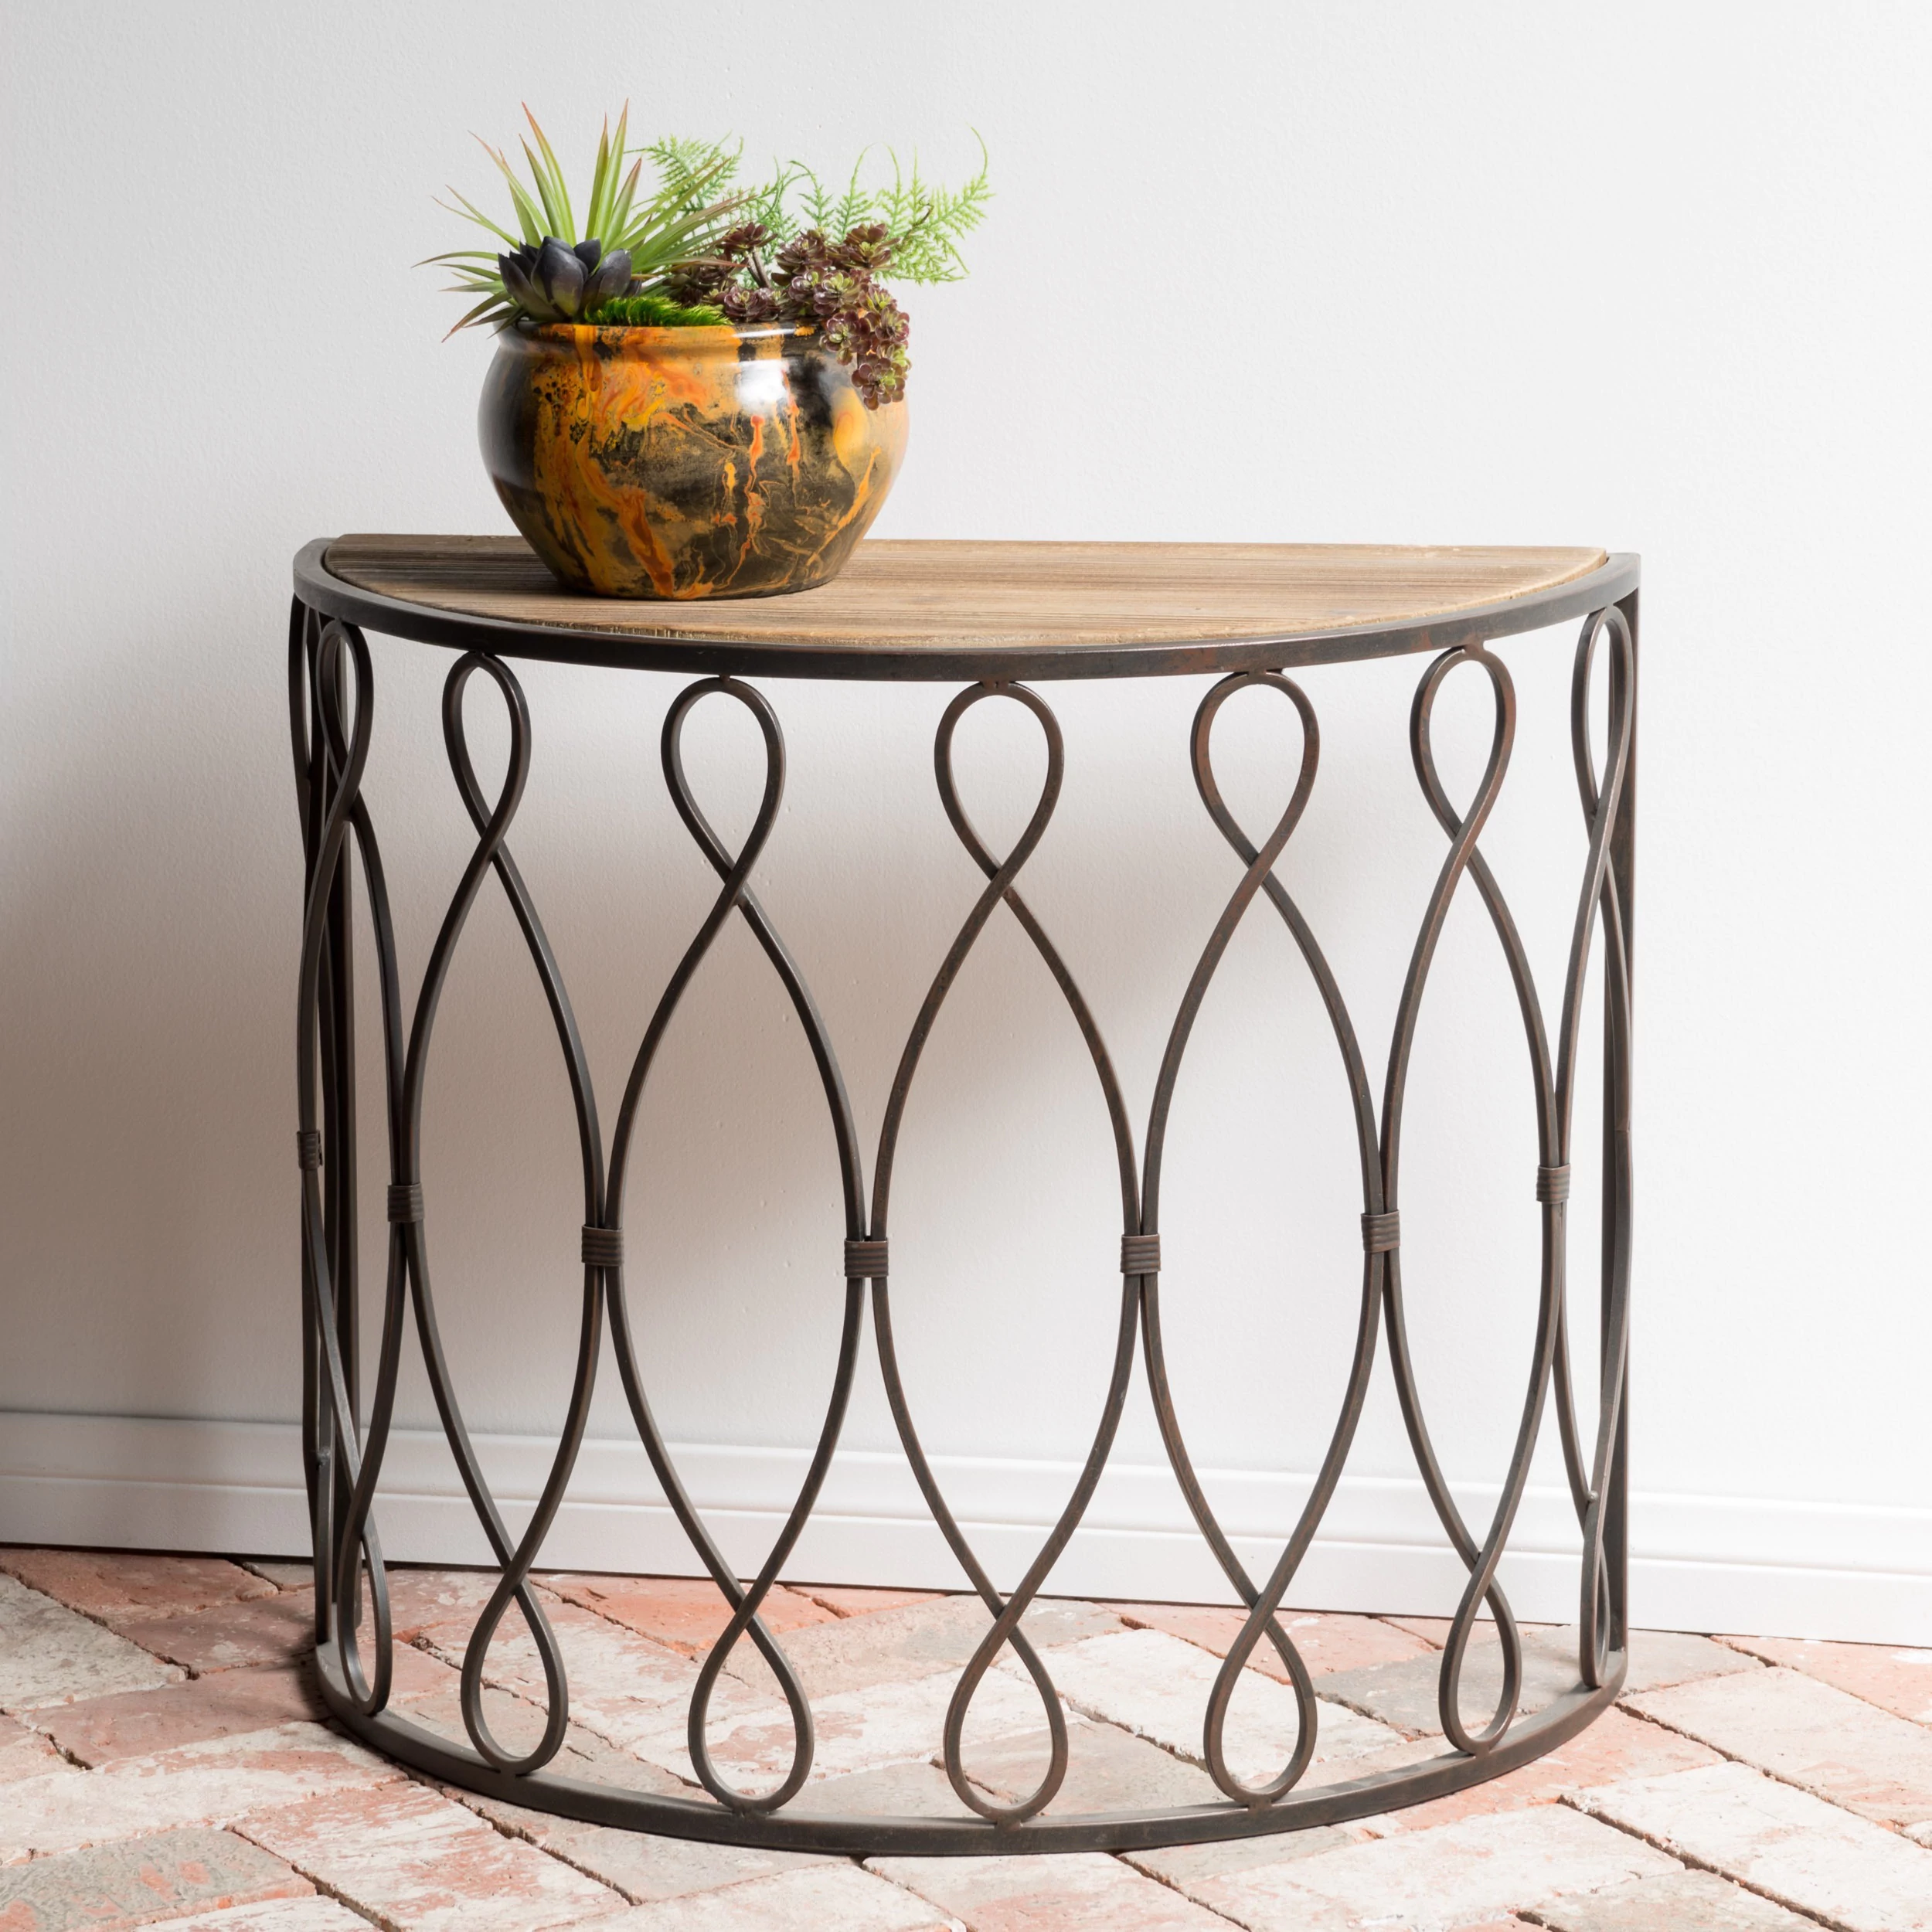 marseille small rustic accent table christopher knight home free shipping today target threshold windham cabinet crosley furniture antique nesting tables with inlay wood block